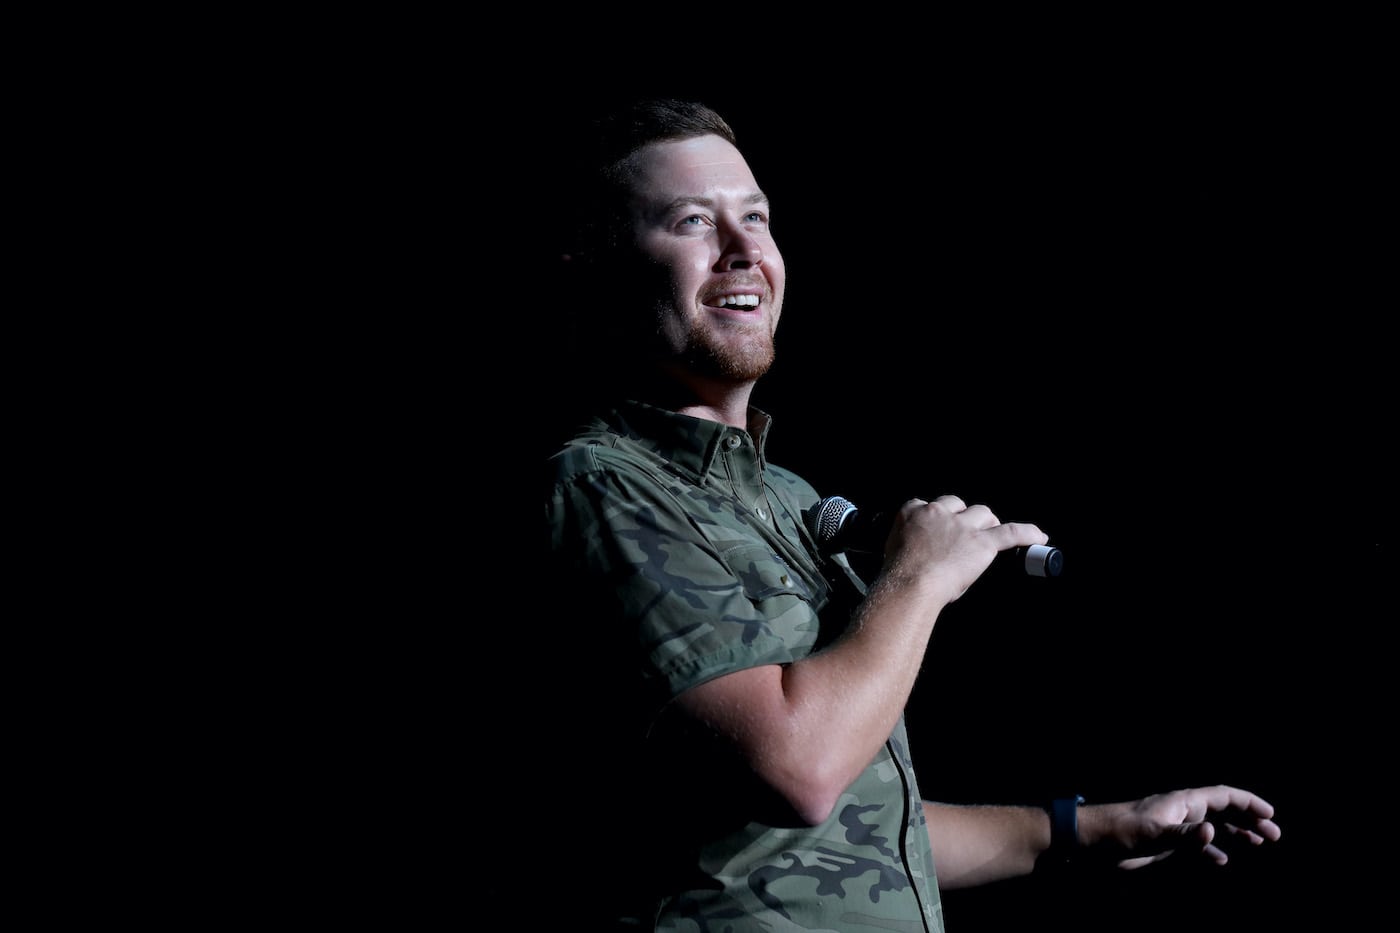 Scotty McCreery performs and holds a microphone and smiles